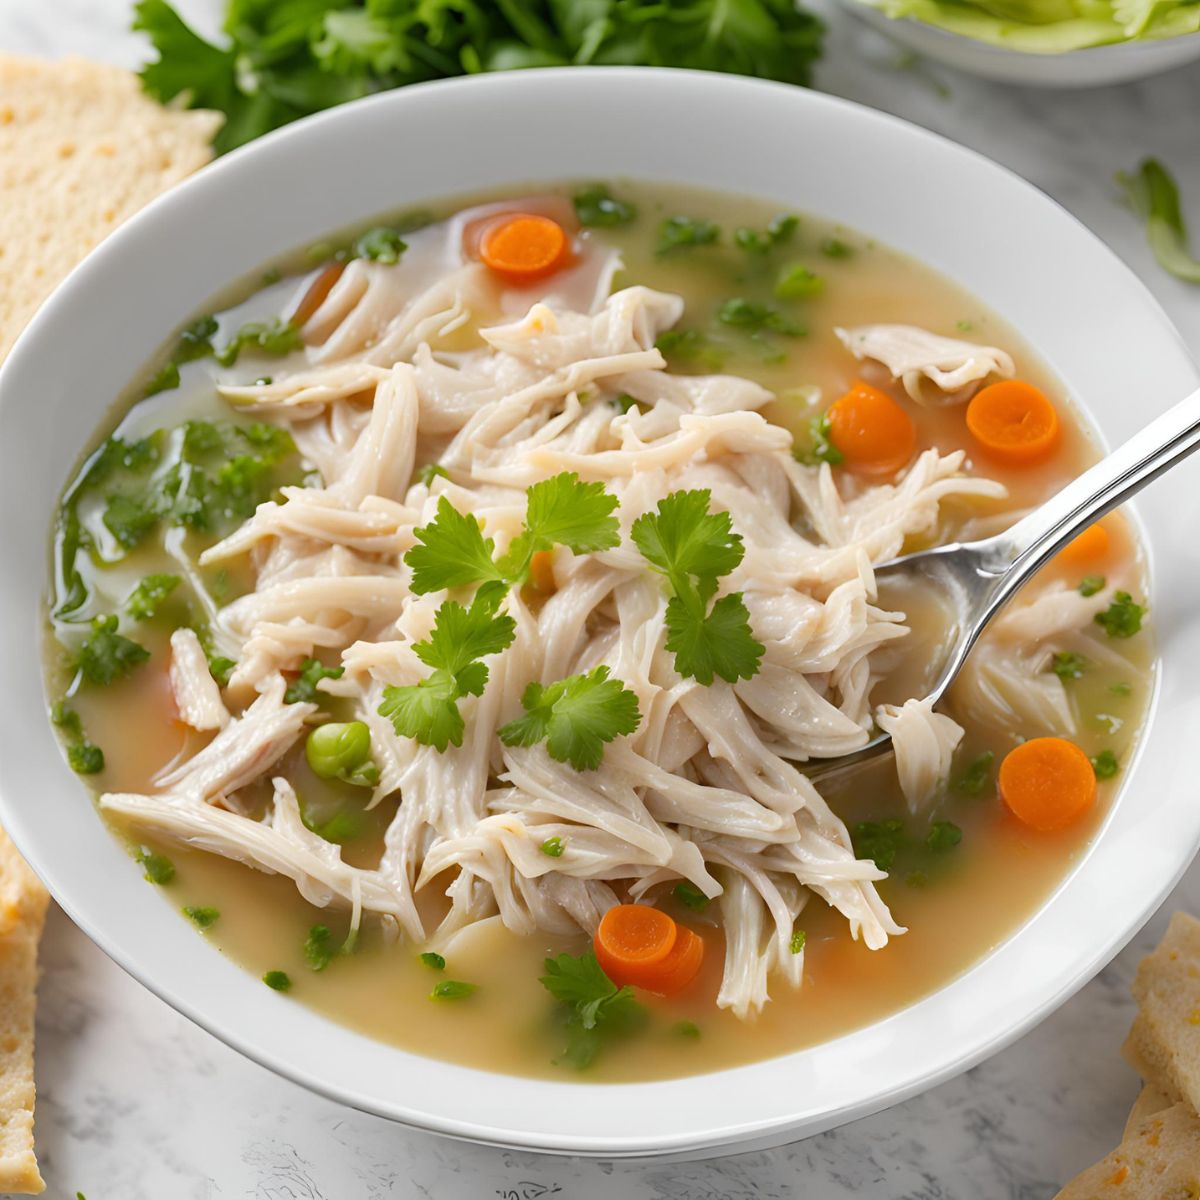 Shredded Chicken Soup Recipe: Perfect for Any Day!